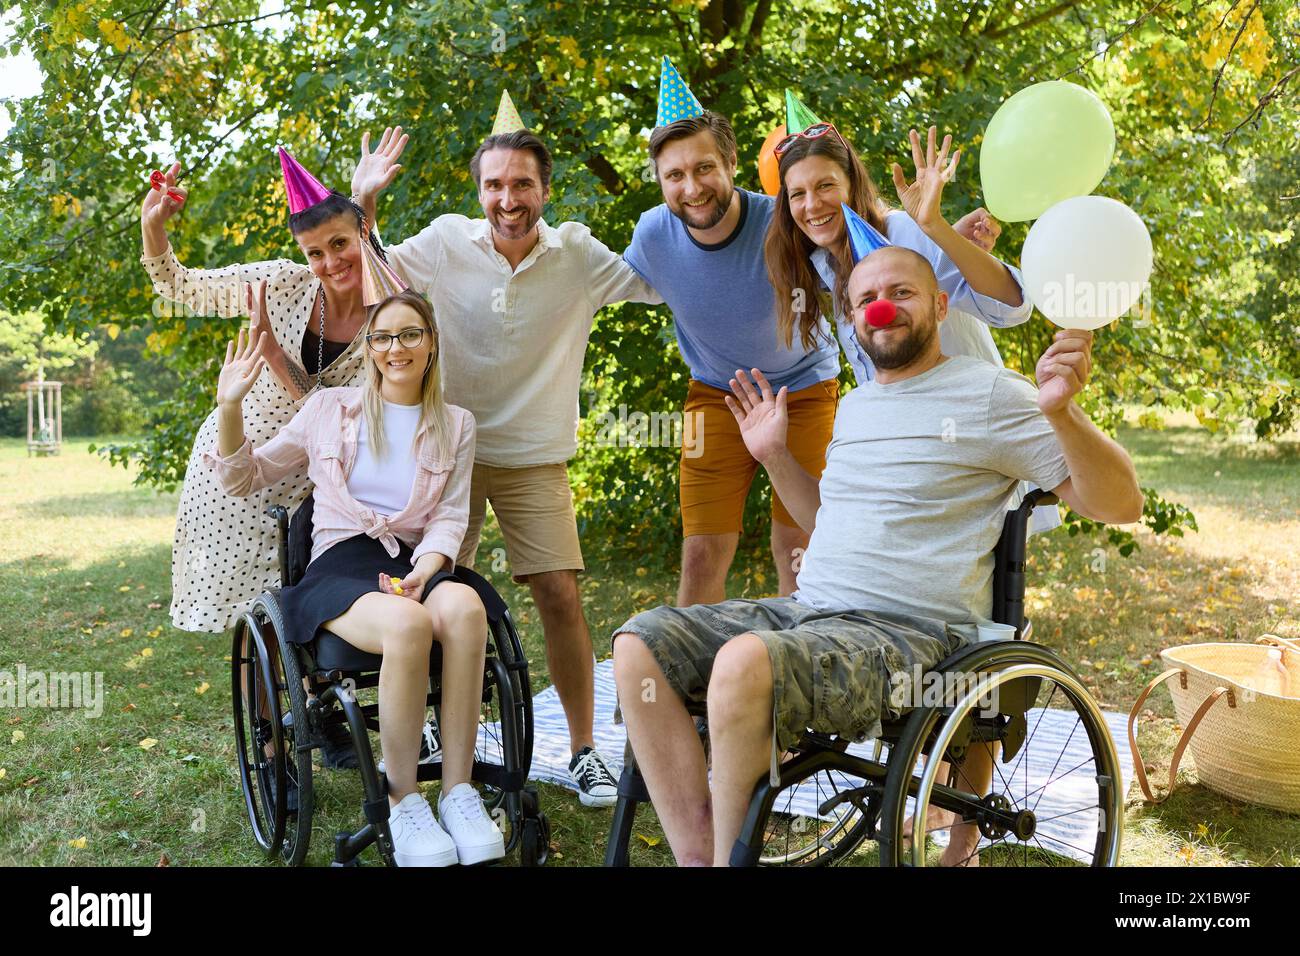 A group of friends, including people using wheelchairs, enjoy a vibrant outdoor party with balloons, celebrating inclusion and joy in a lush park sett Stock Photo